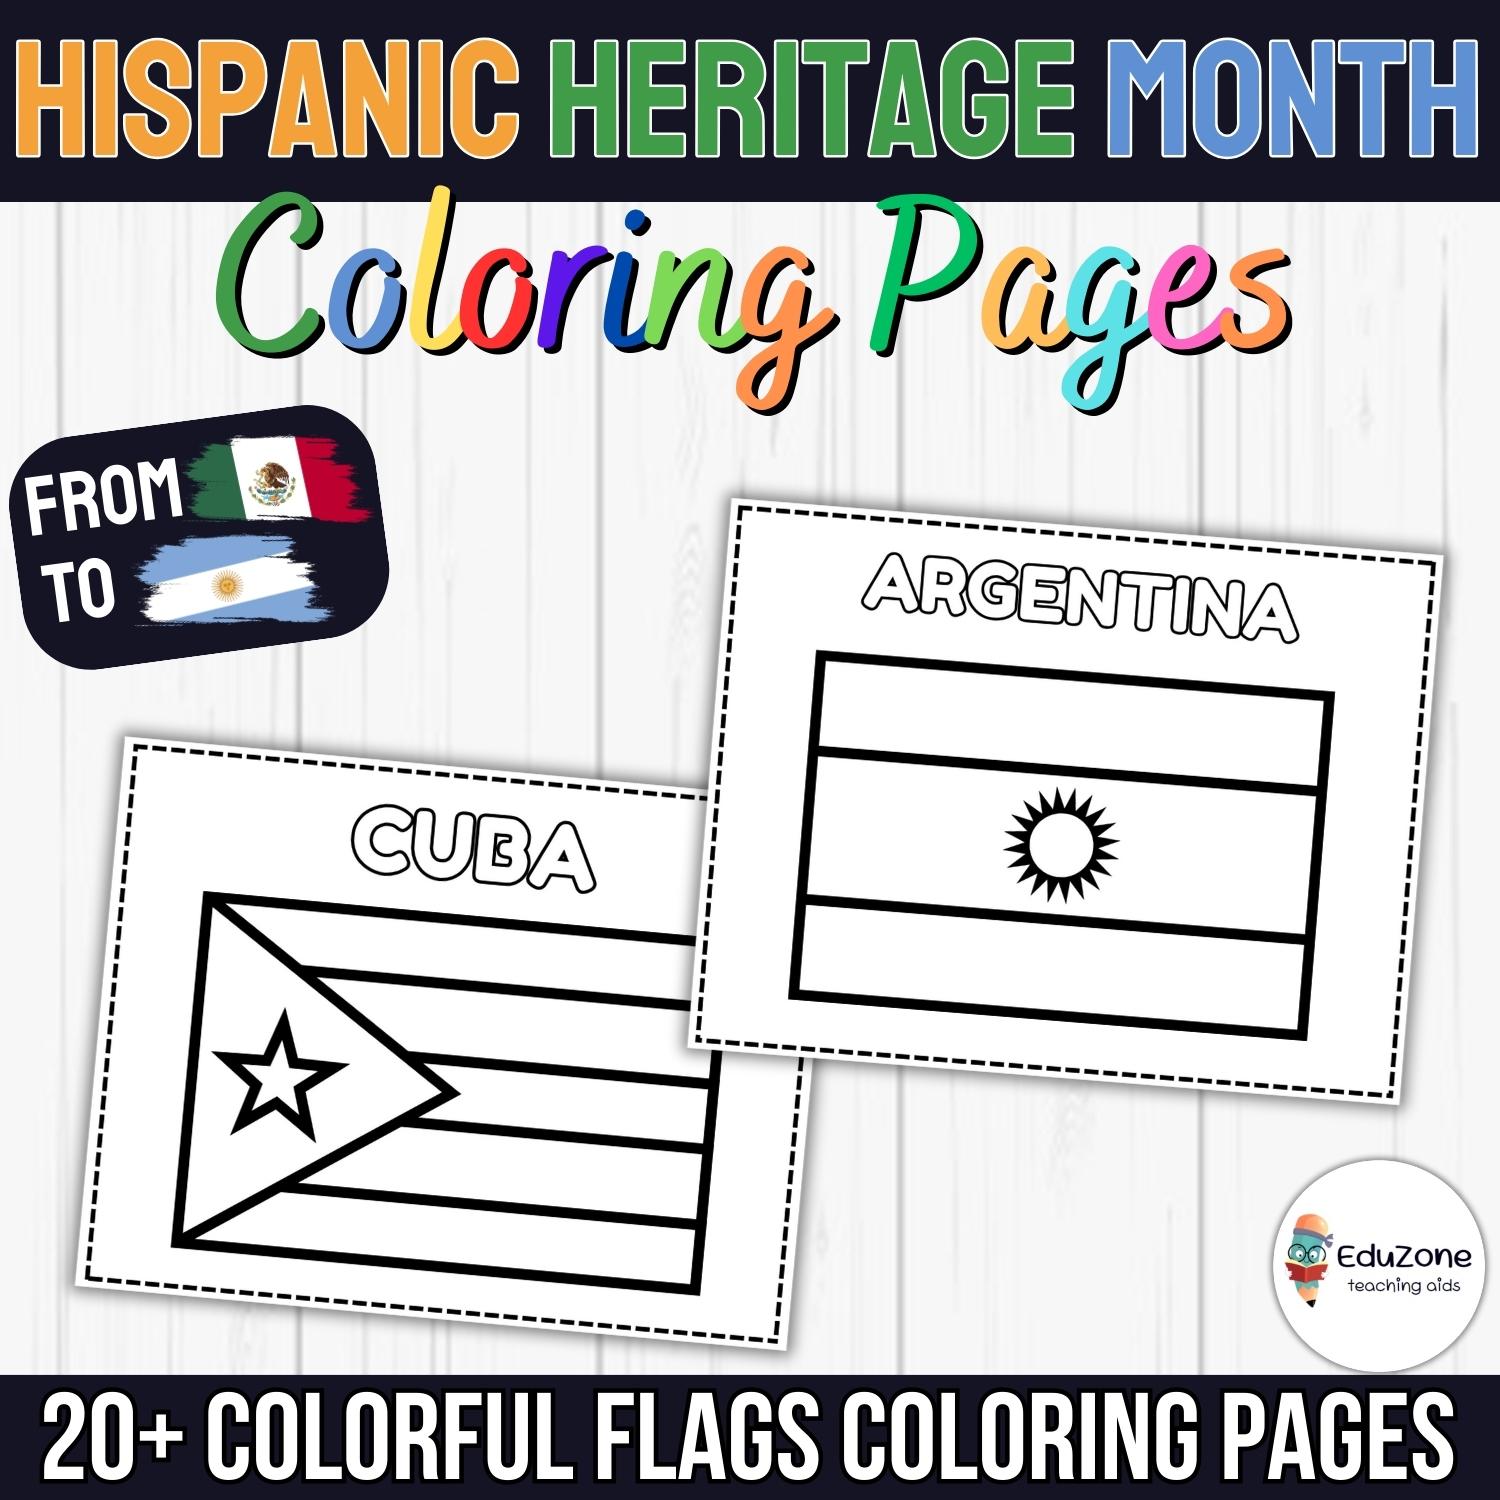 Celebrate hispanic heritage month with colorful flags coloring pages made by teachers